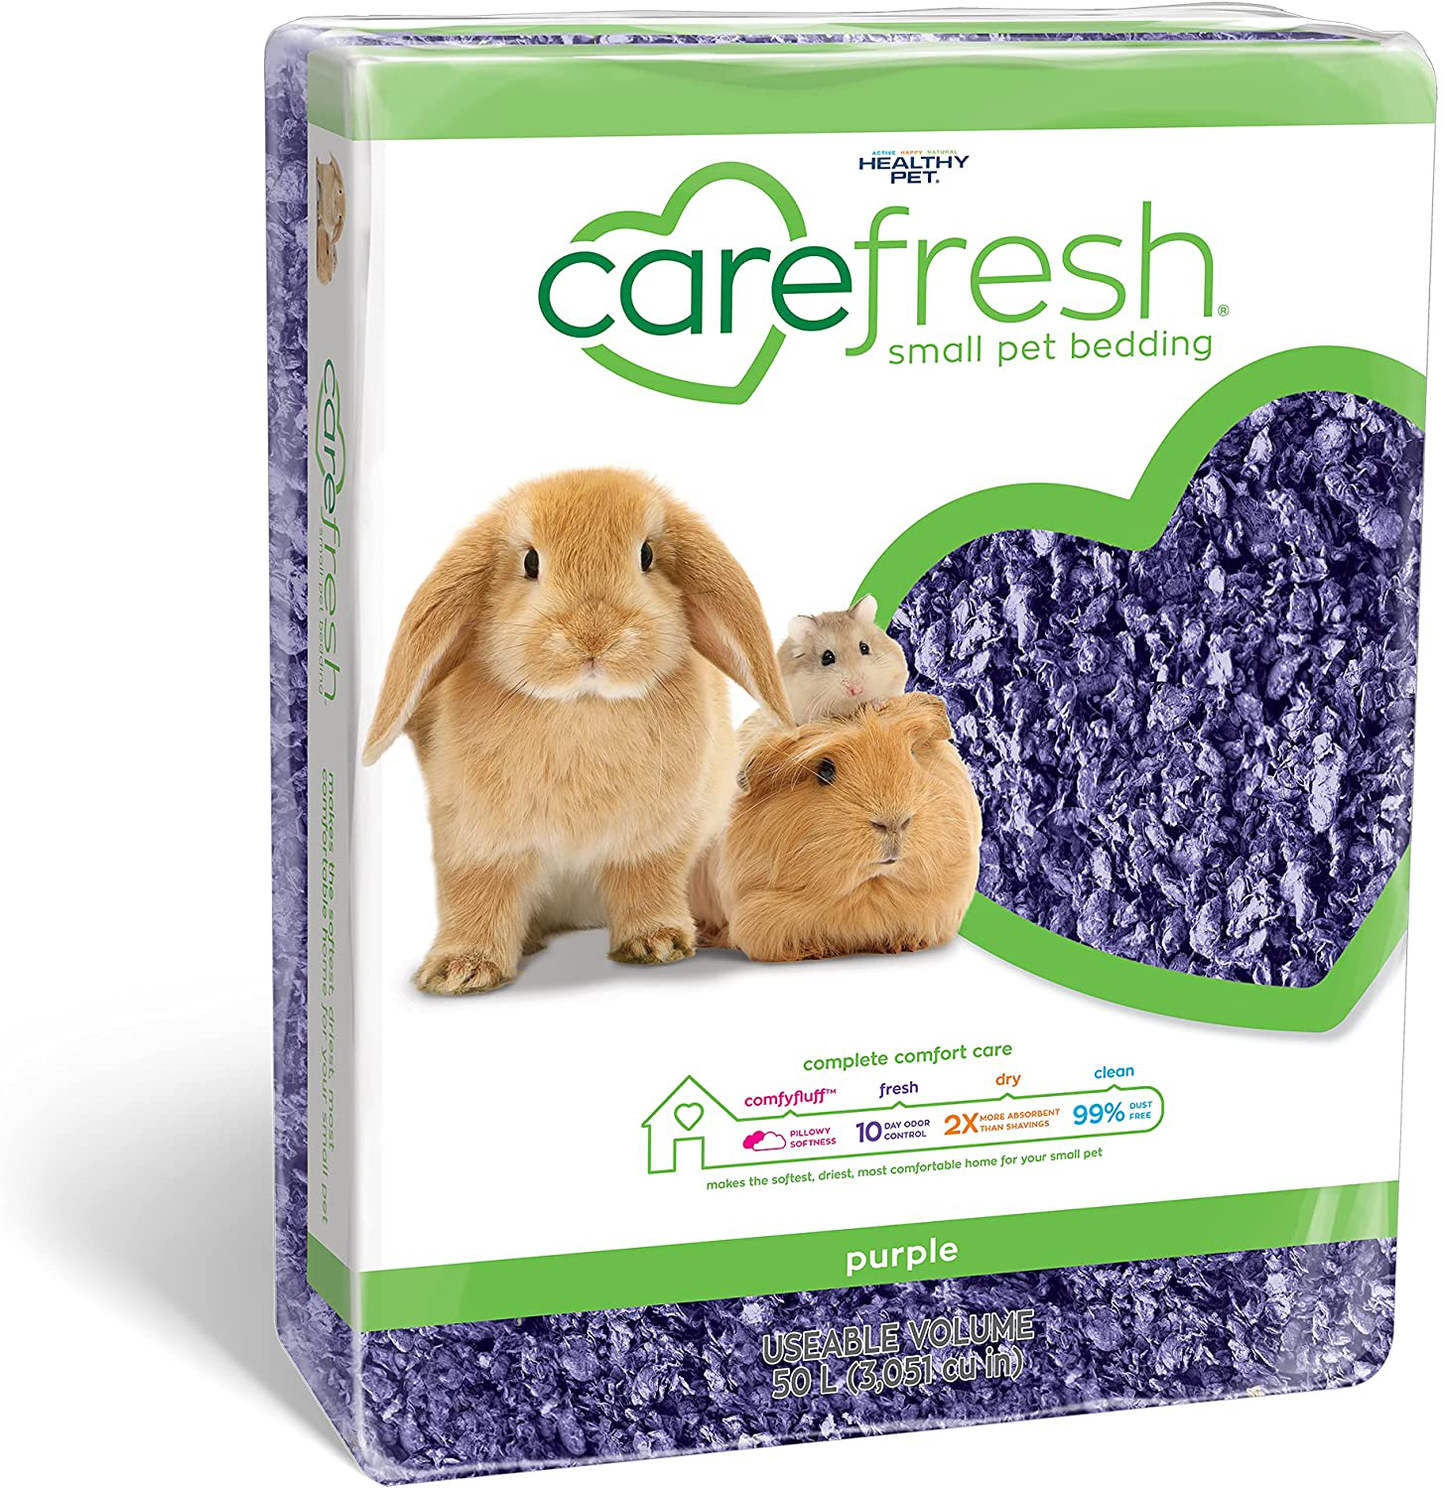 Carefresh 99% Dust-Free Natural Paper Small Pet Bedding with Odor Control